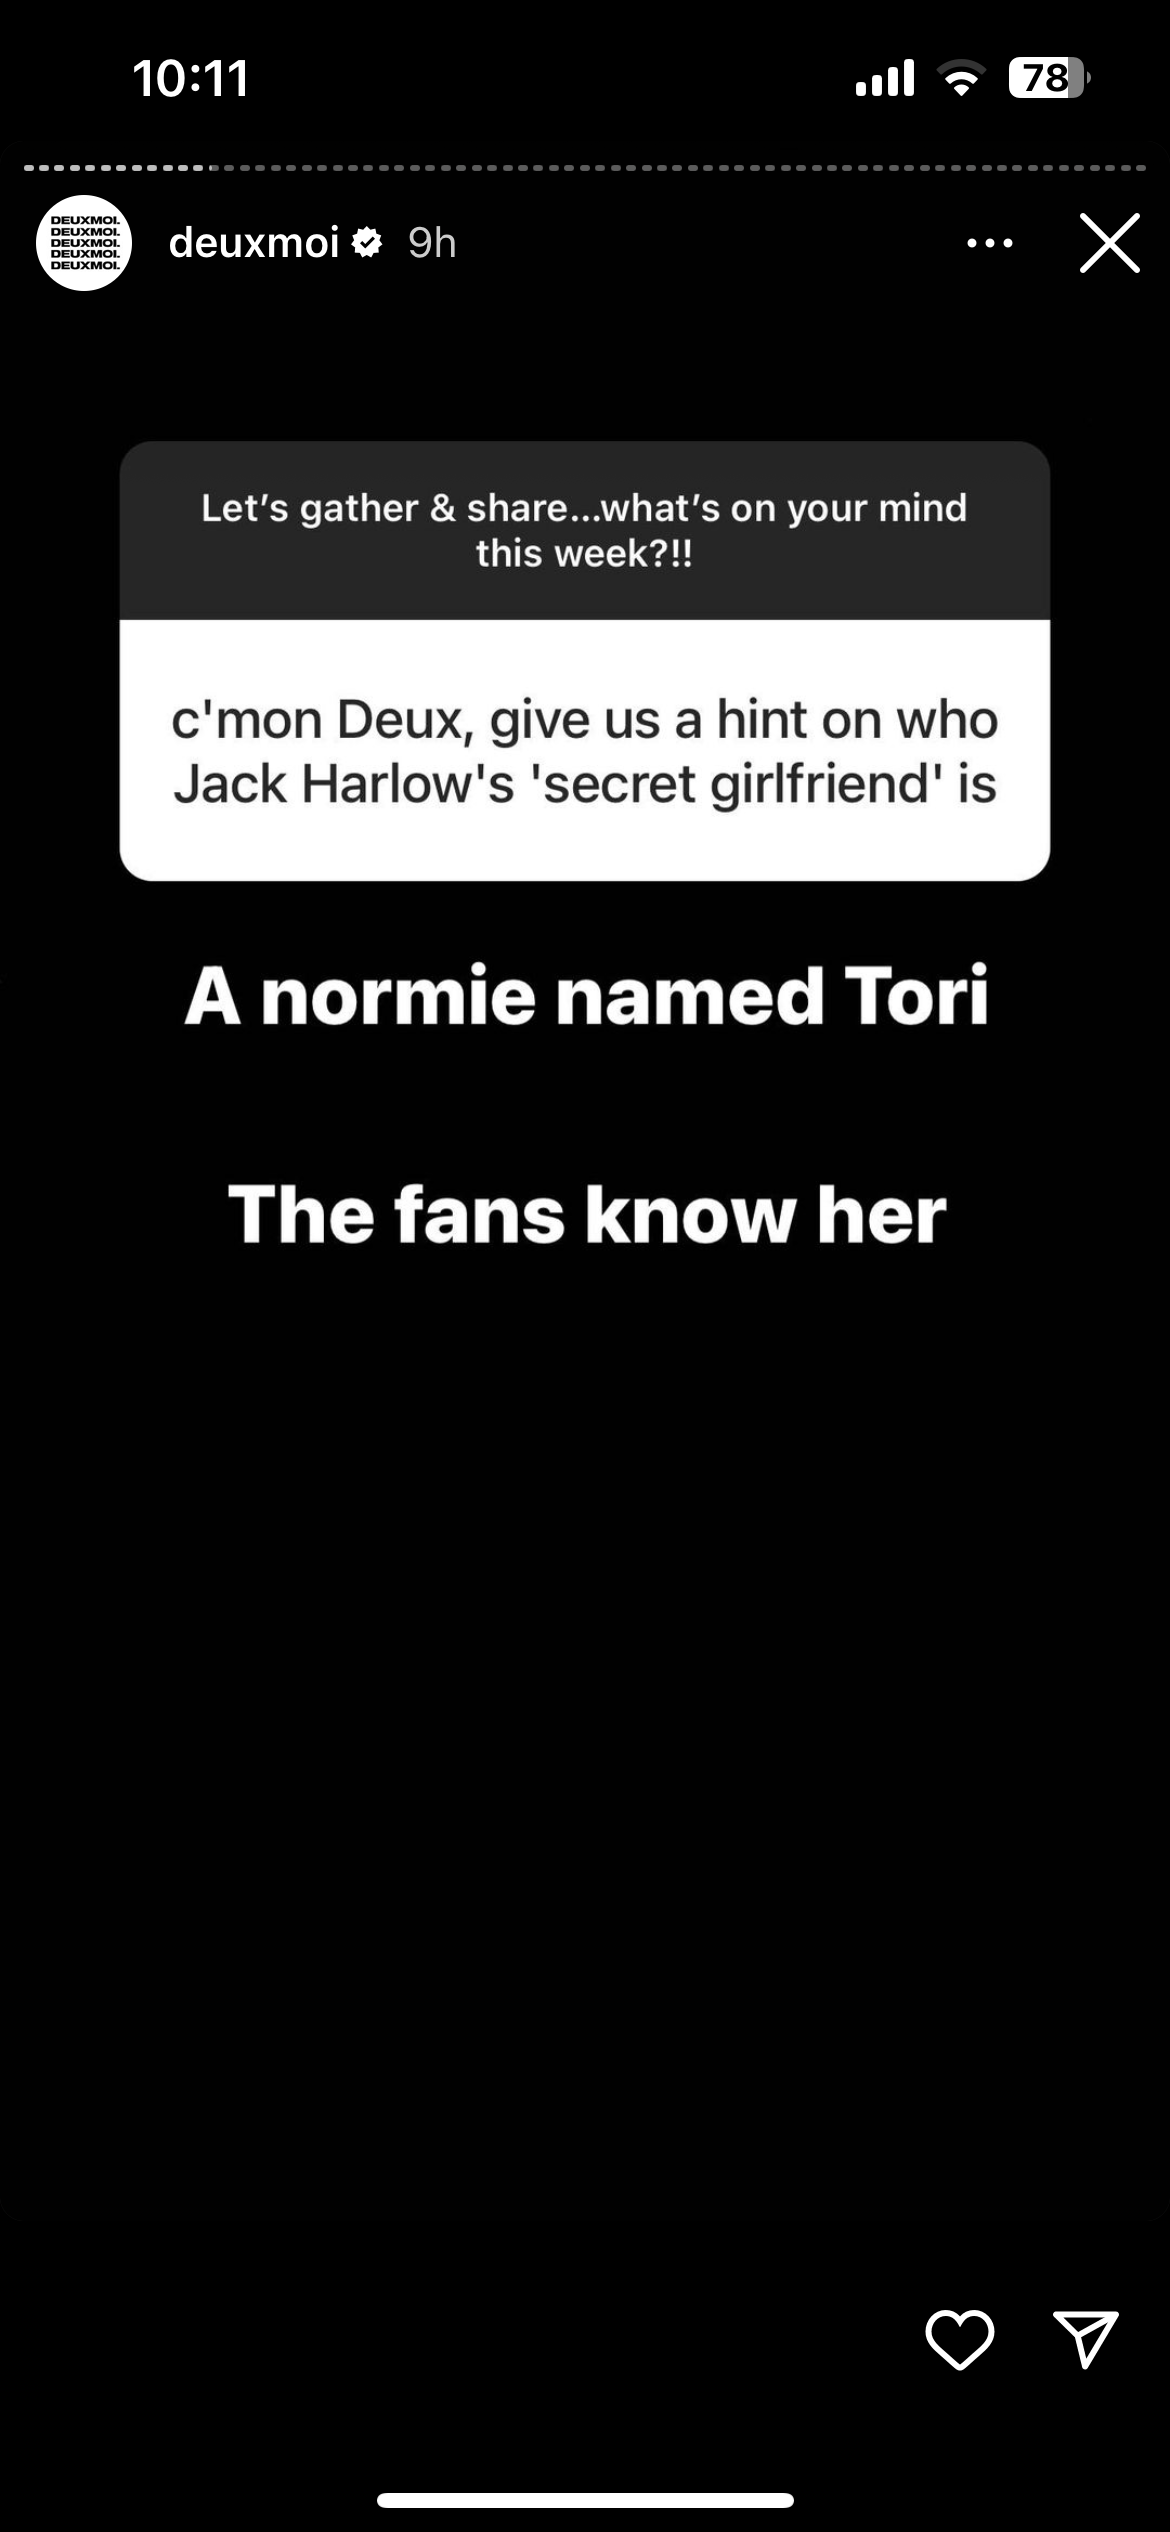 DeuxMoi revealed that Jack Harlow’s secret girlfriend was “a normie named Tori.”